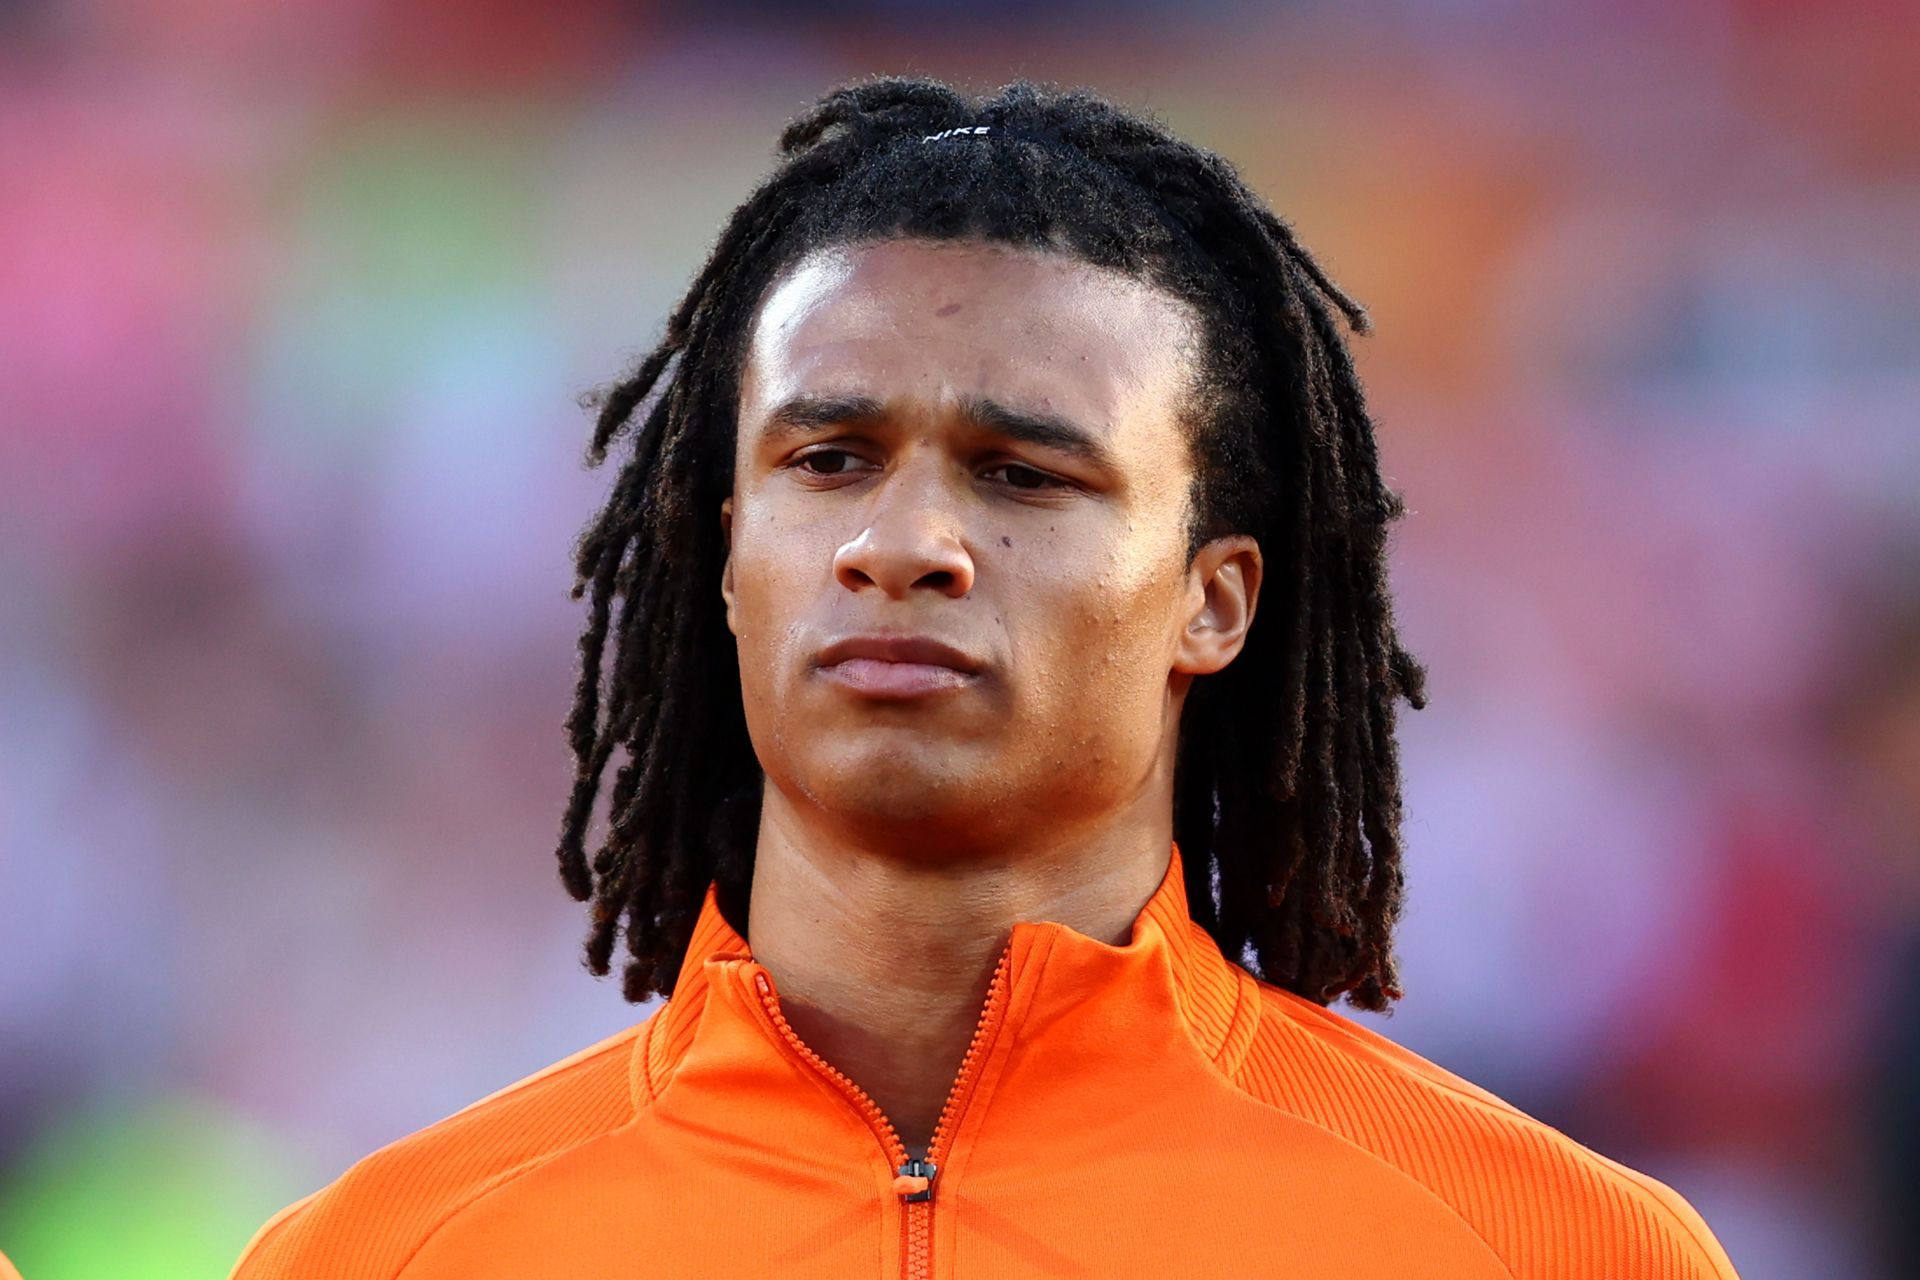 Nathan Ake is expected to join Chelsea this window